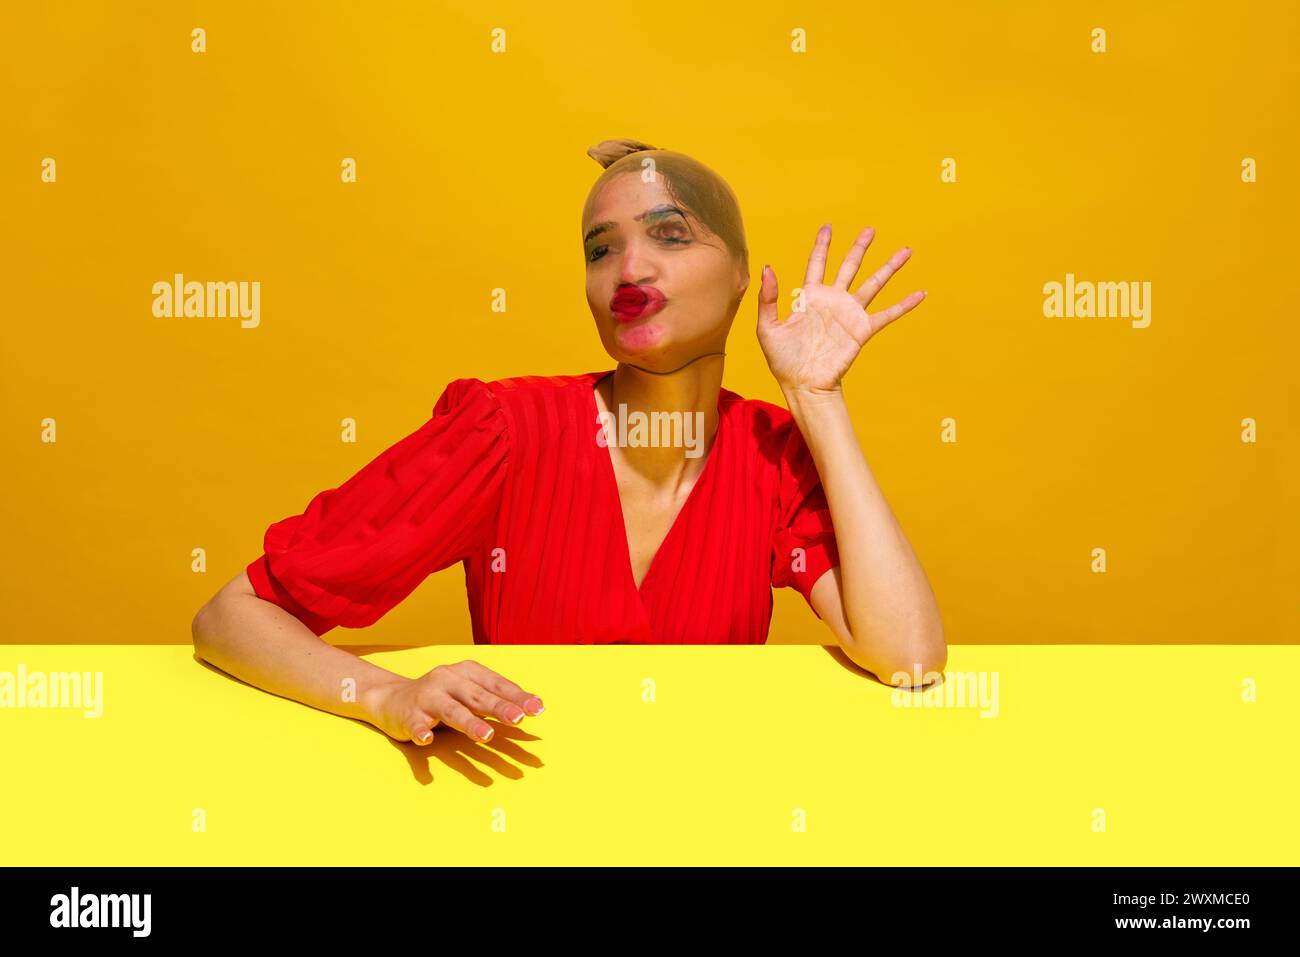 Young woman with stocking over head with smudged lipstick makeup making funny expression against yellow background Stock Photo